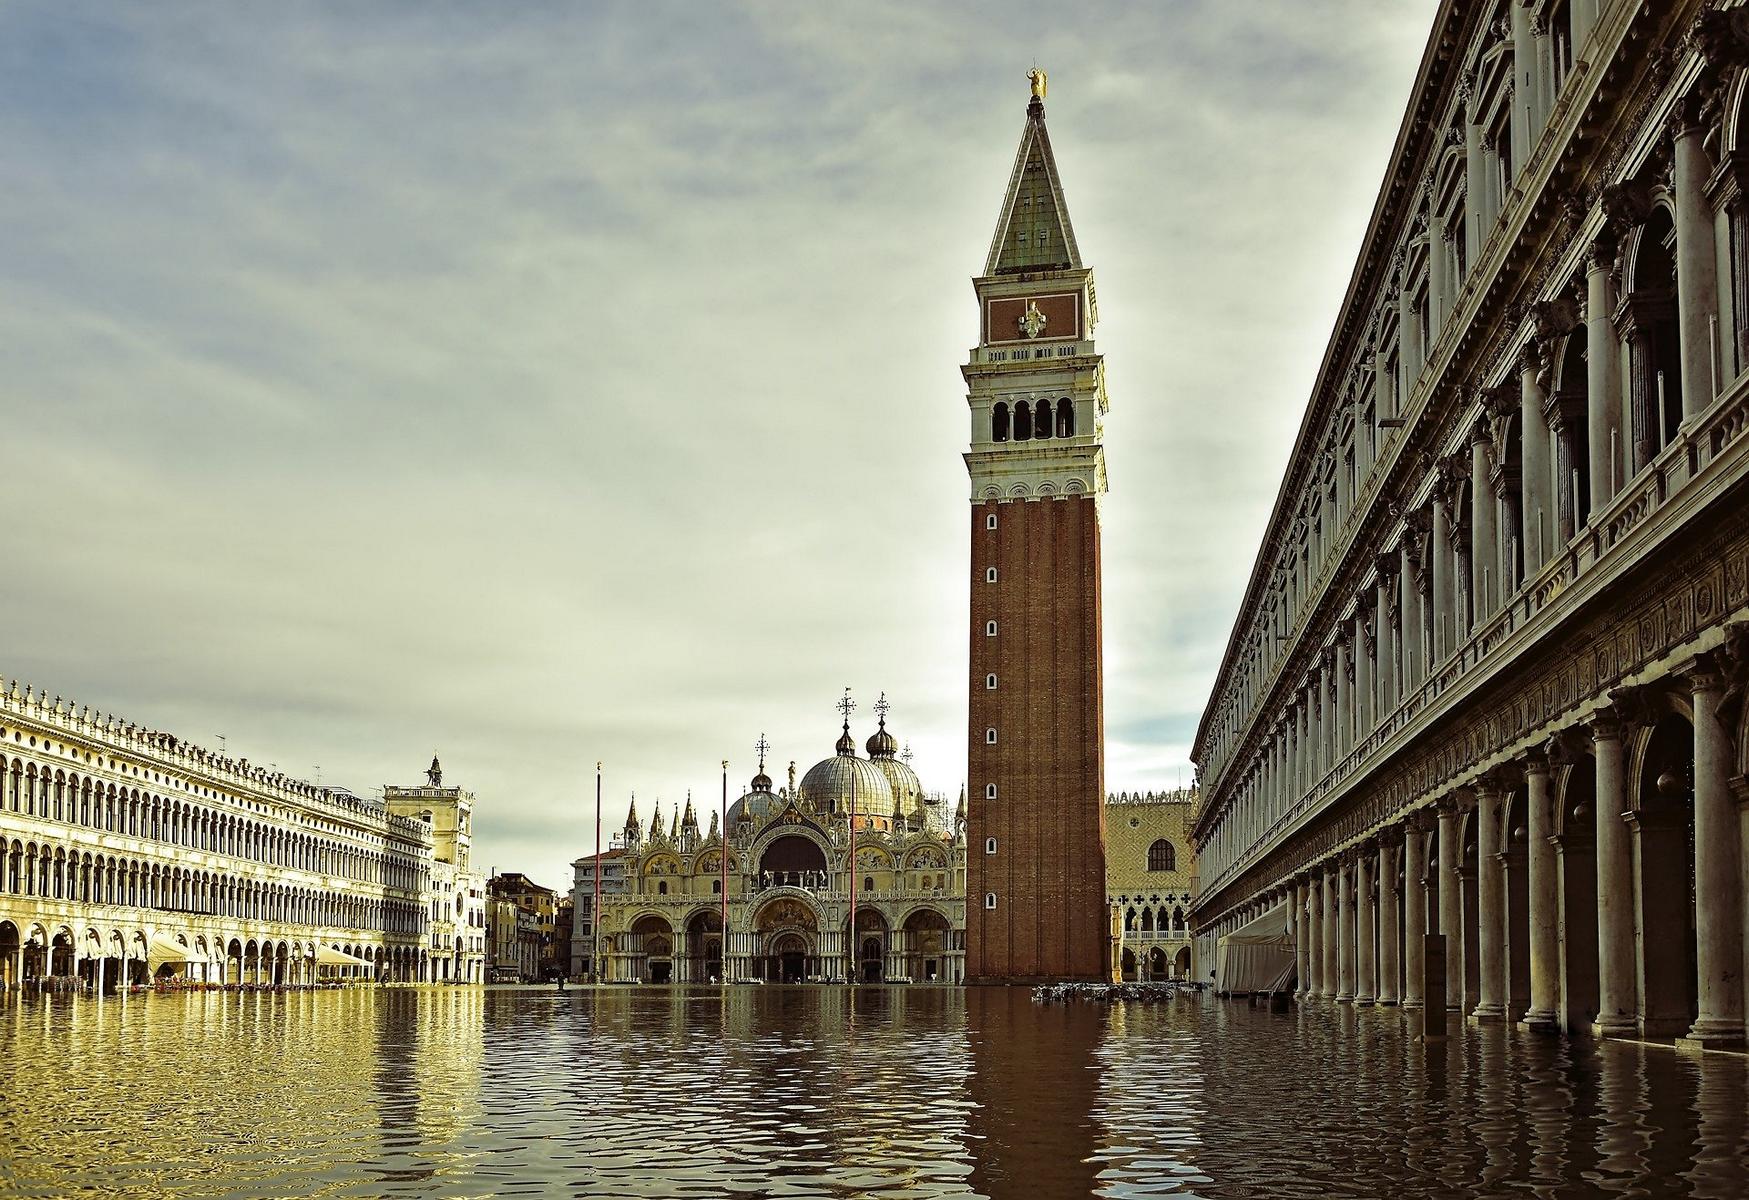 The best Venice travel guides: My very special recommendations